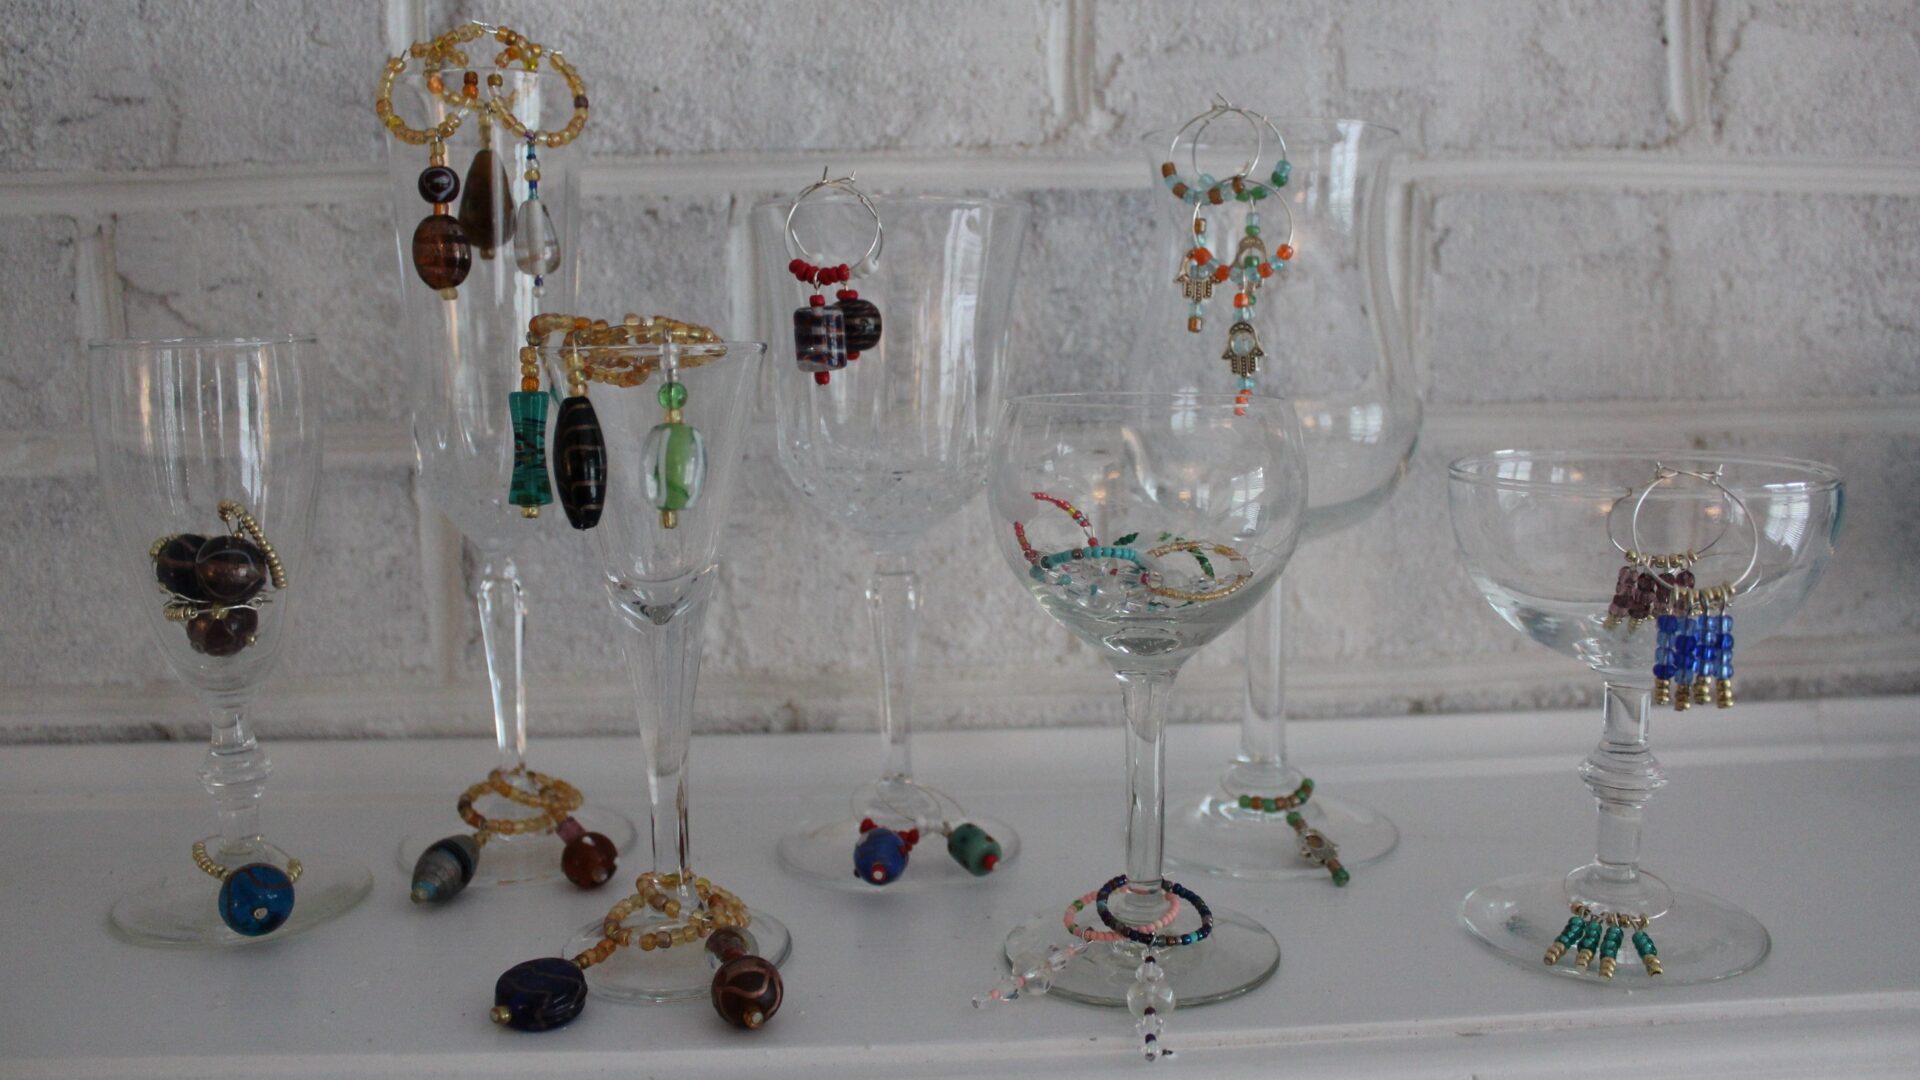 A table with wine glasses and jewelry on it.